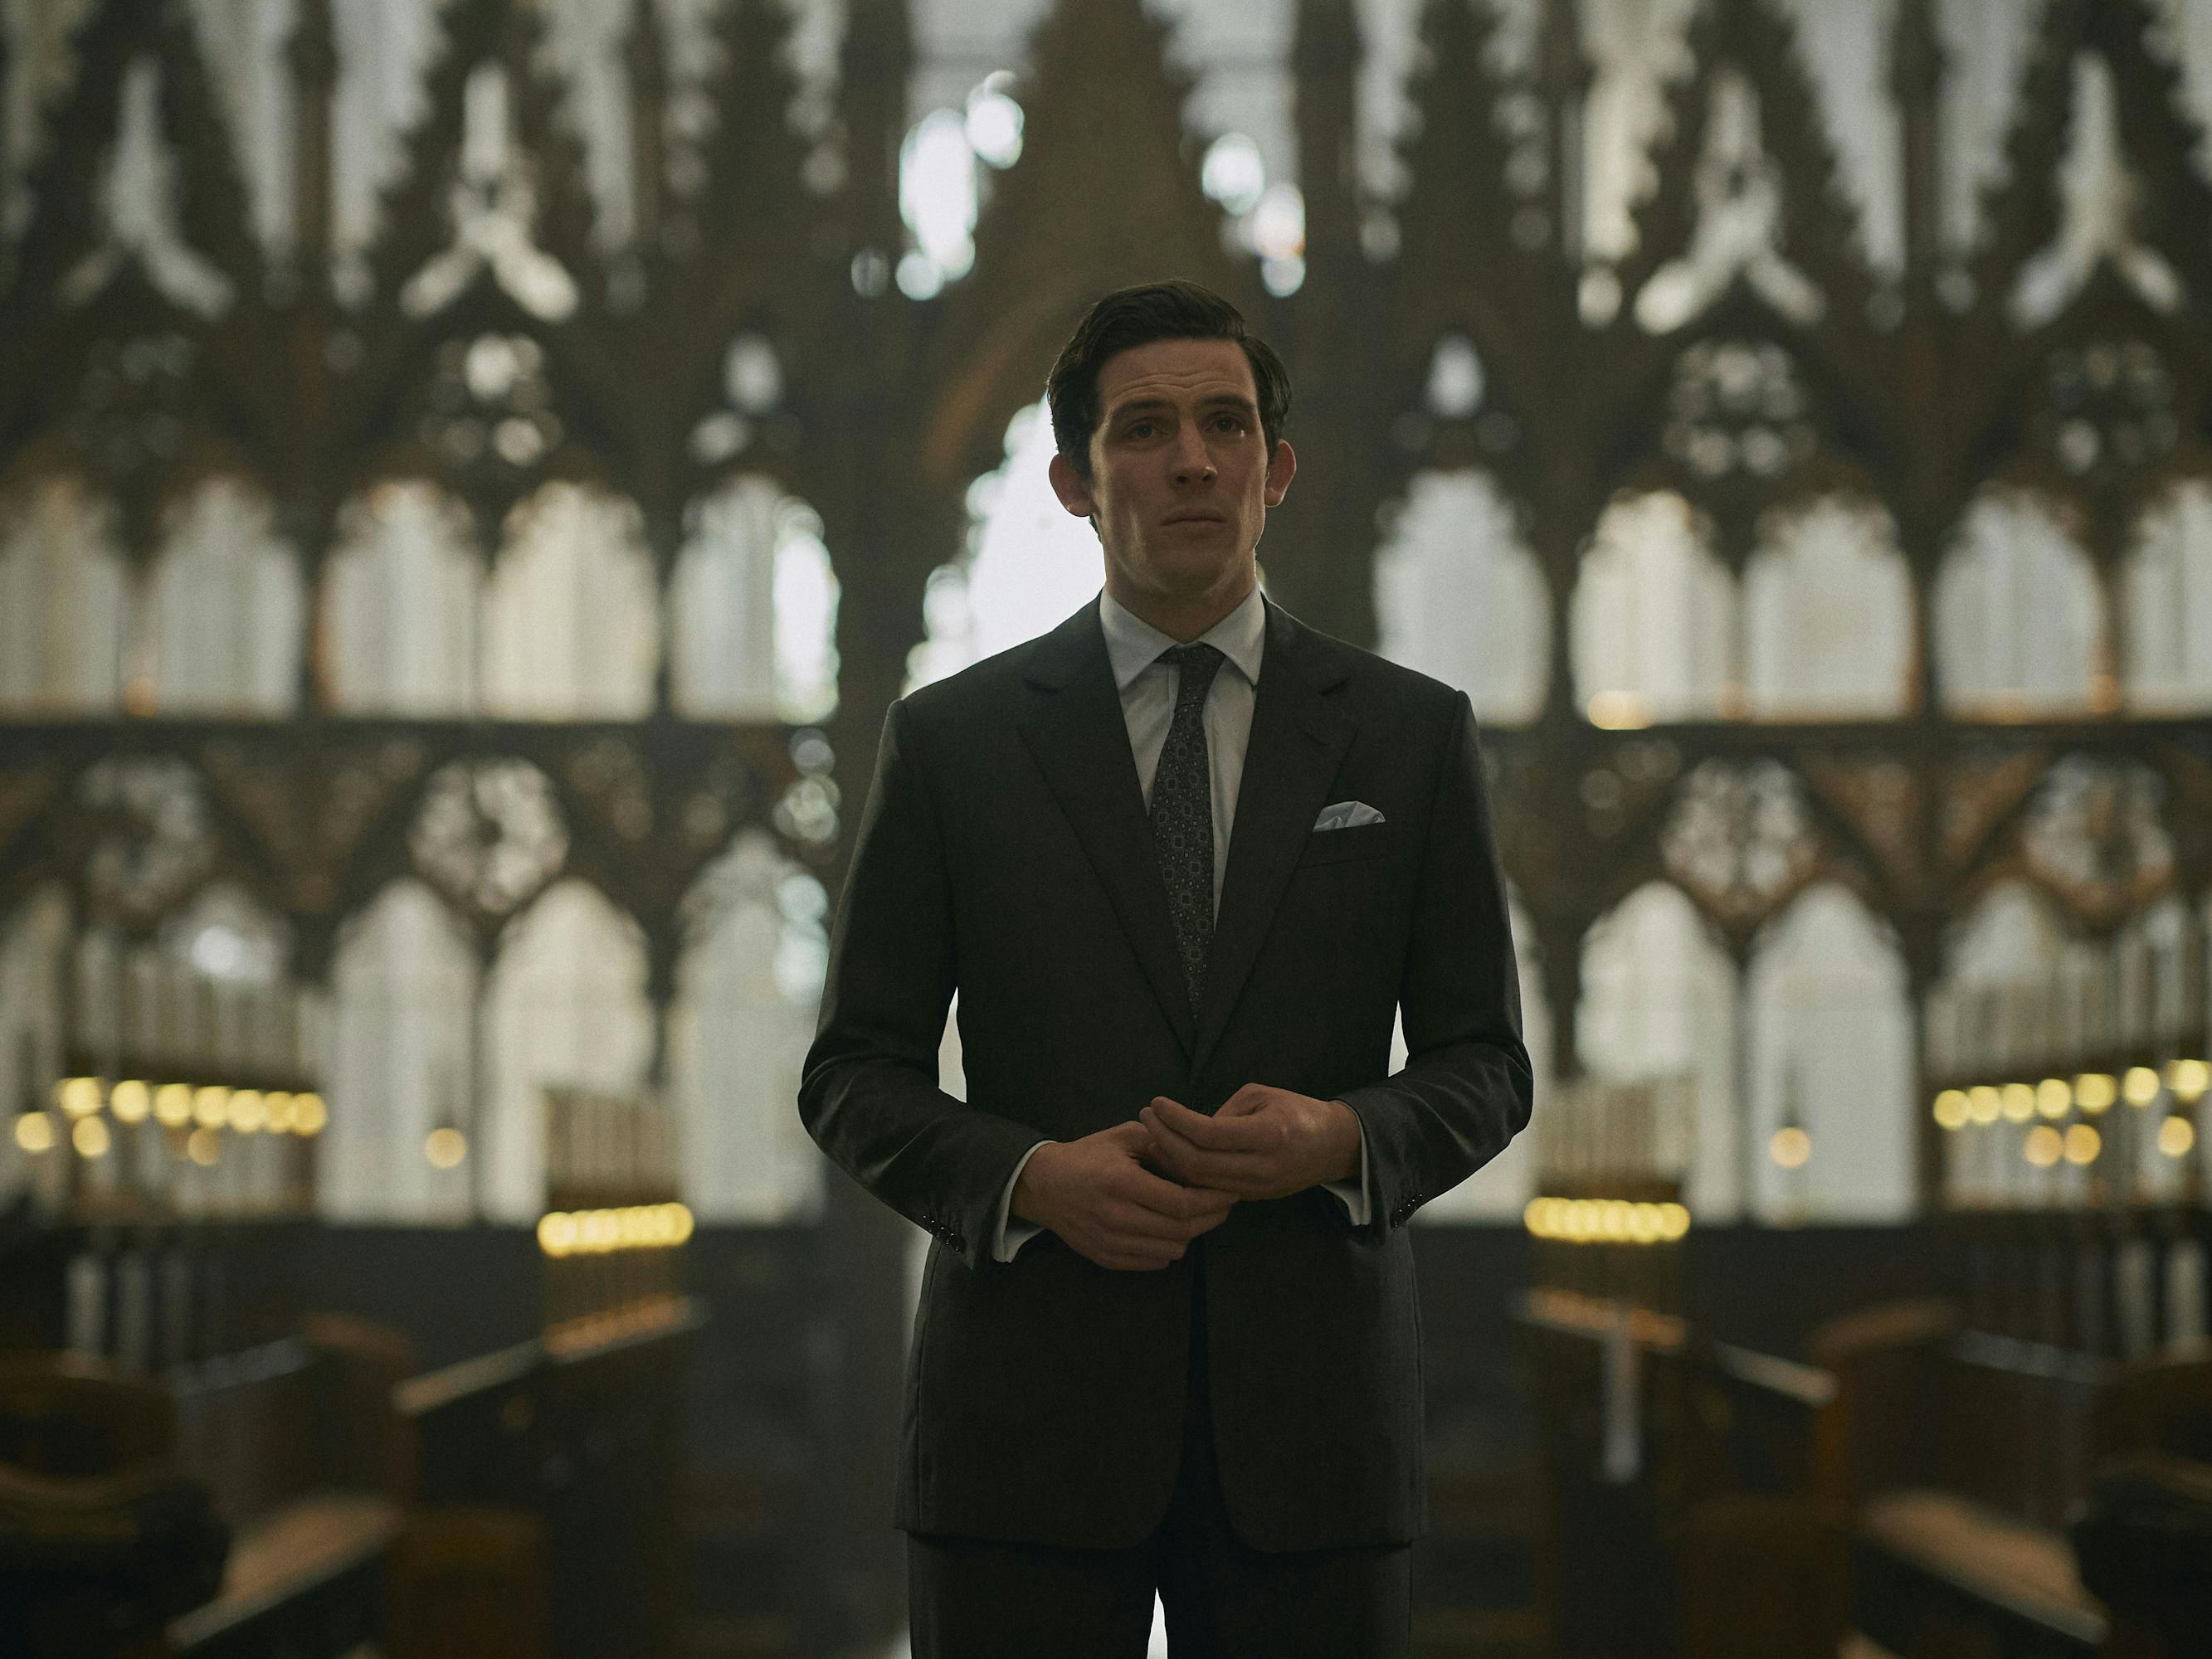 Prince Charles (Josh O'Connor) wears a suit and stands in a drafty church looking daunting.